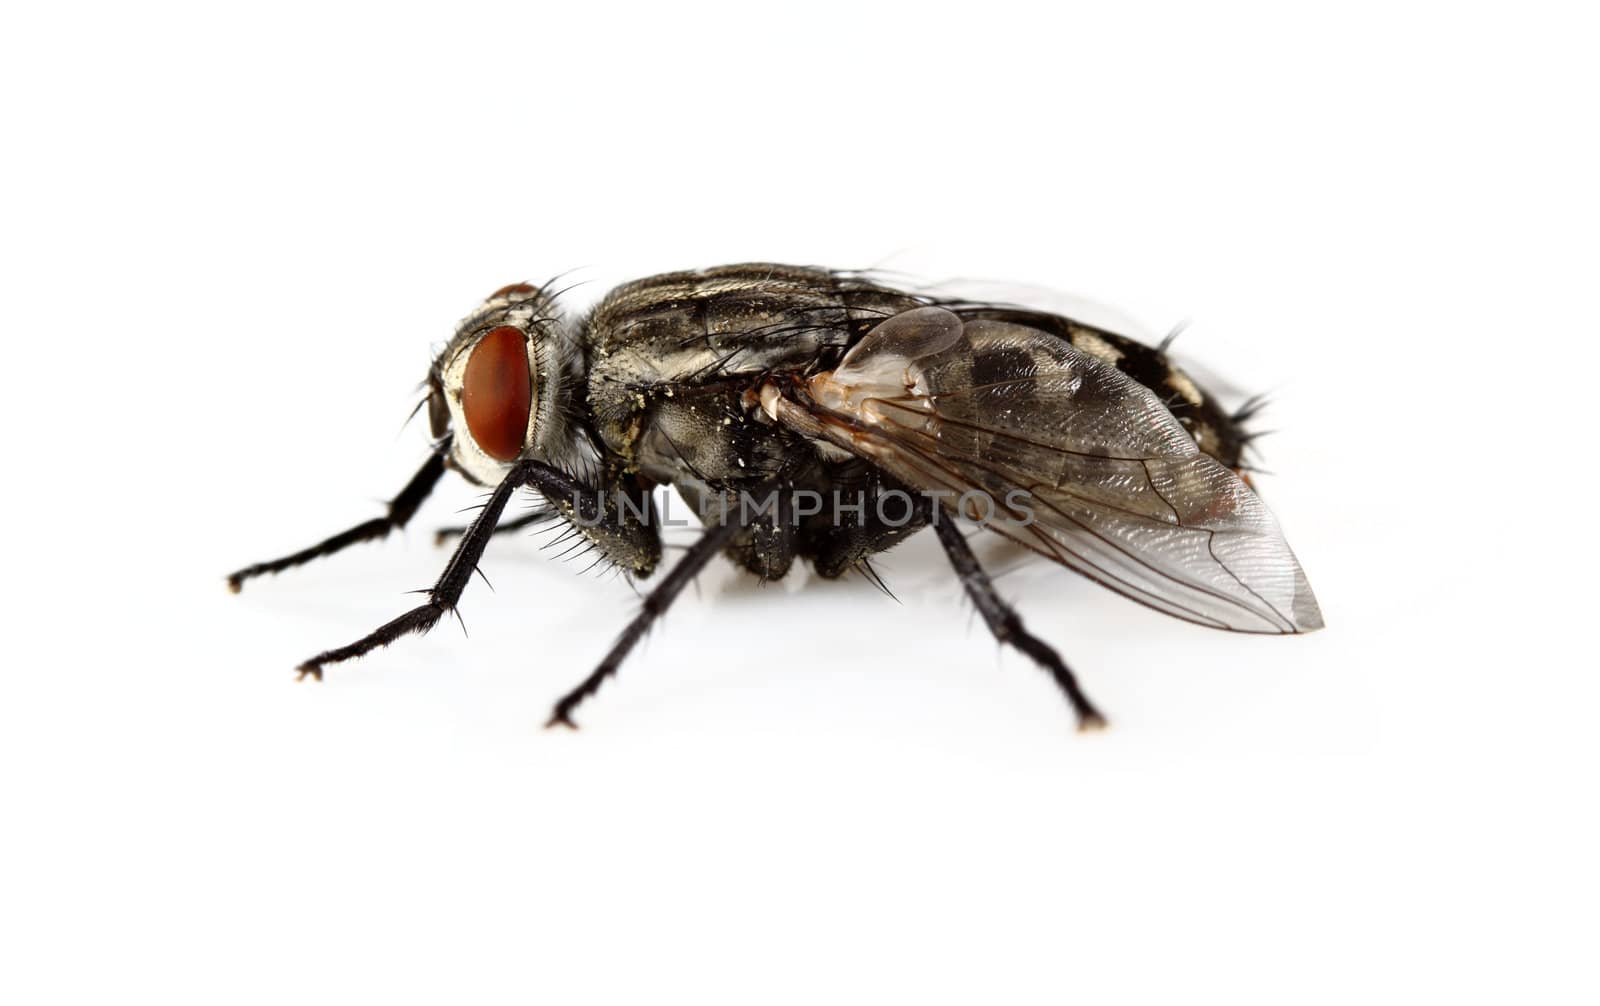 A macro studio shot of a house fly on a solid white background.